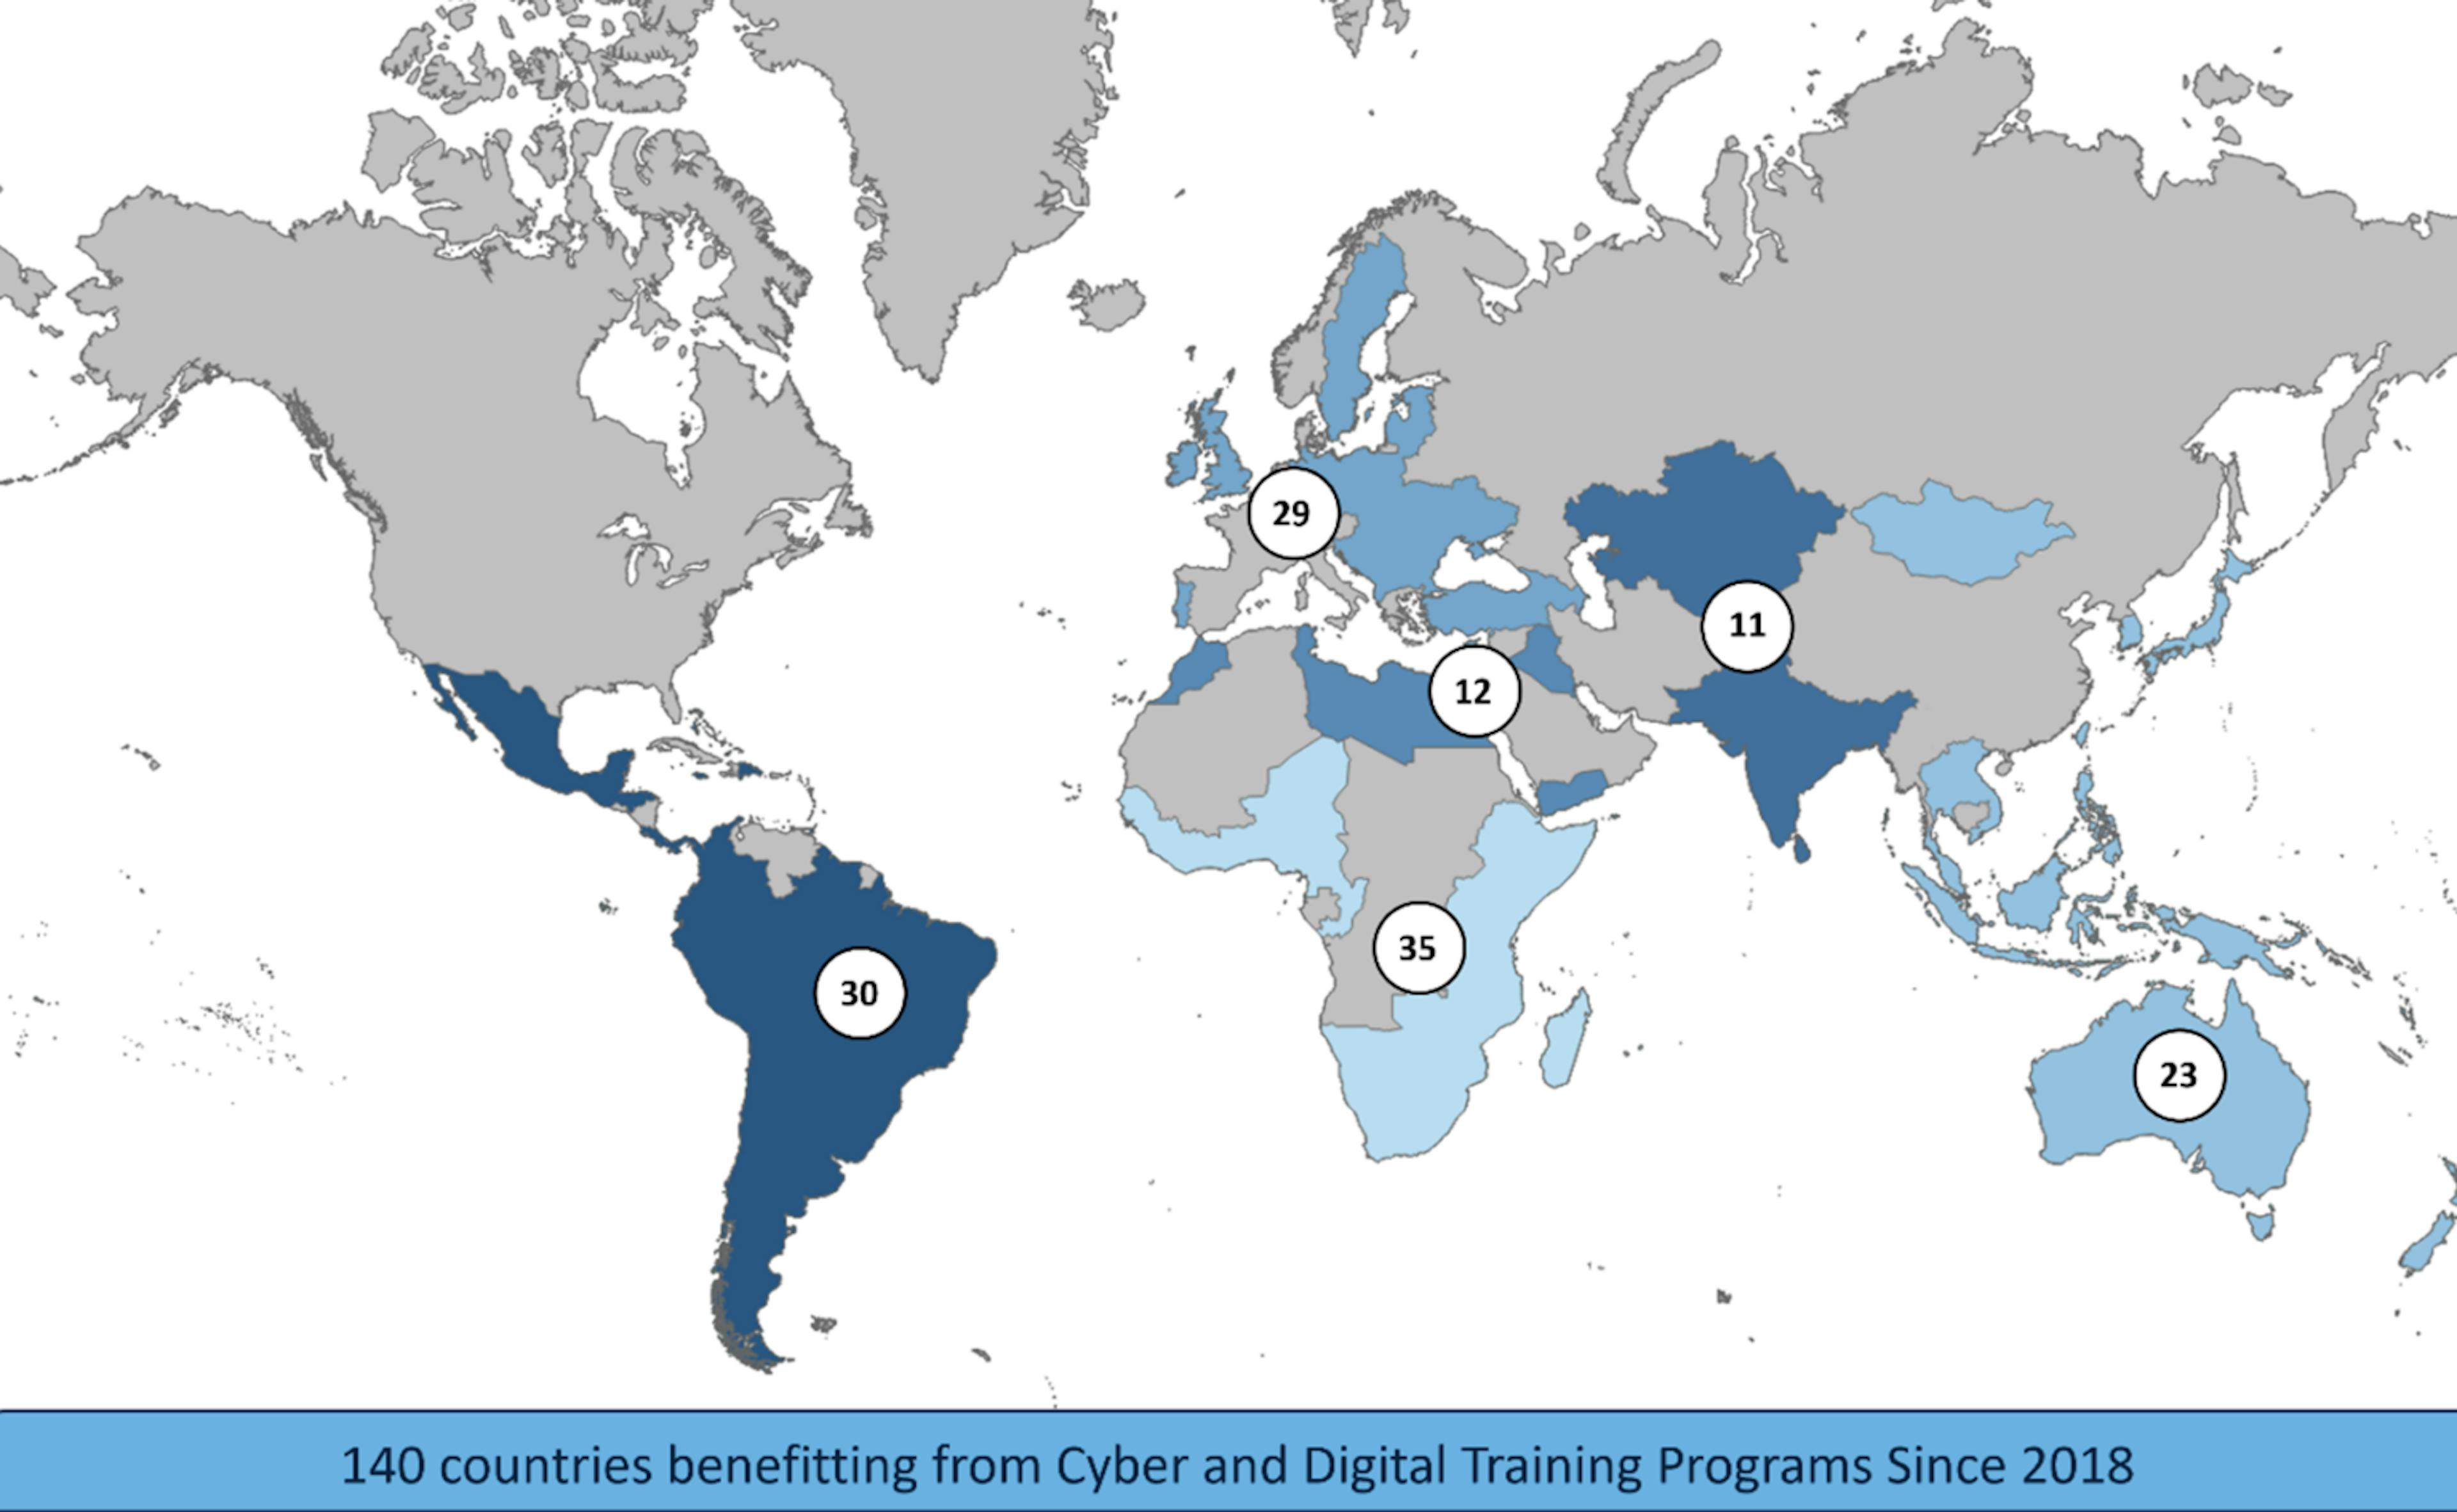 Figure 7. A global map of the Digital Connectivity & Cybersecurity Partnership countries benefitting from Cyber & Digital Training (2018-2024). (U.S. Department of State, CDP)